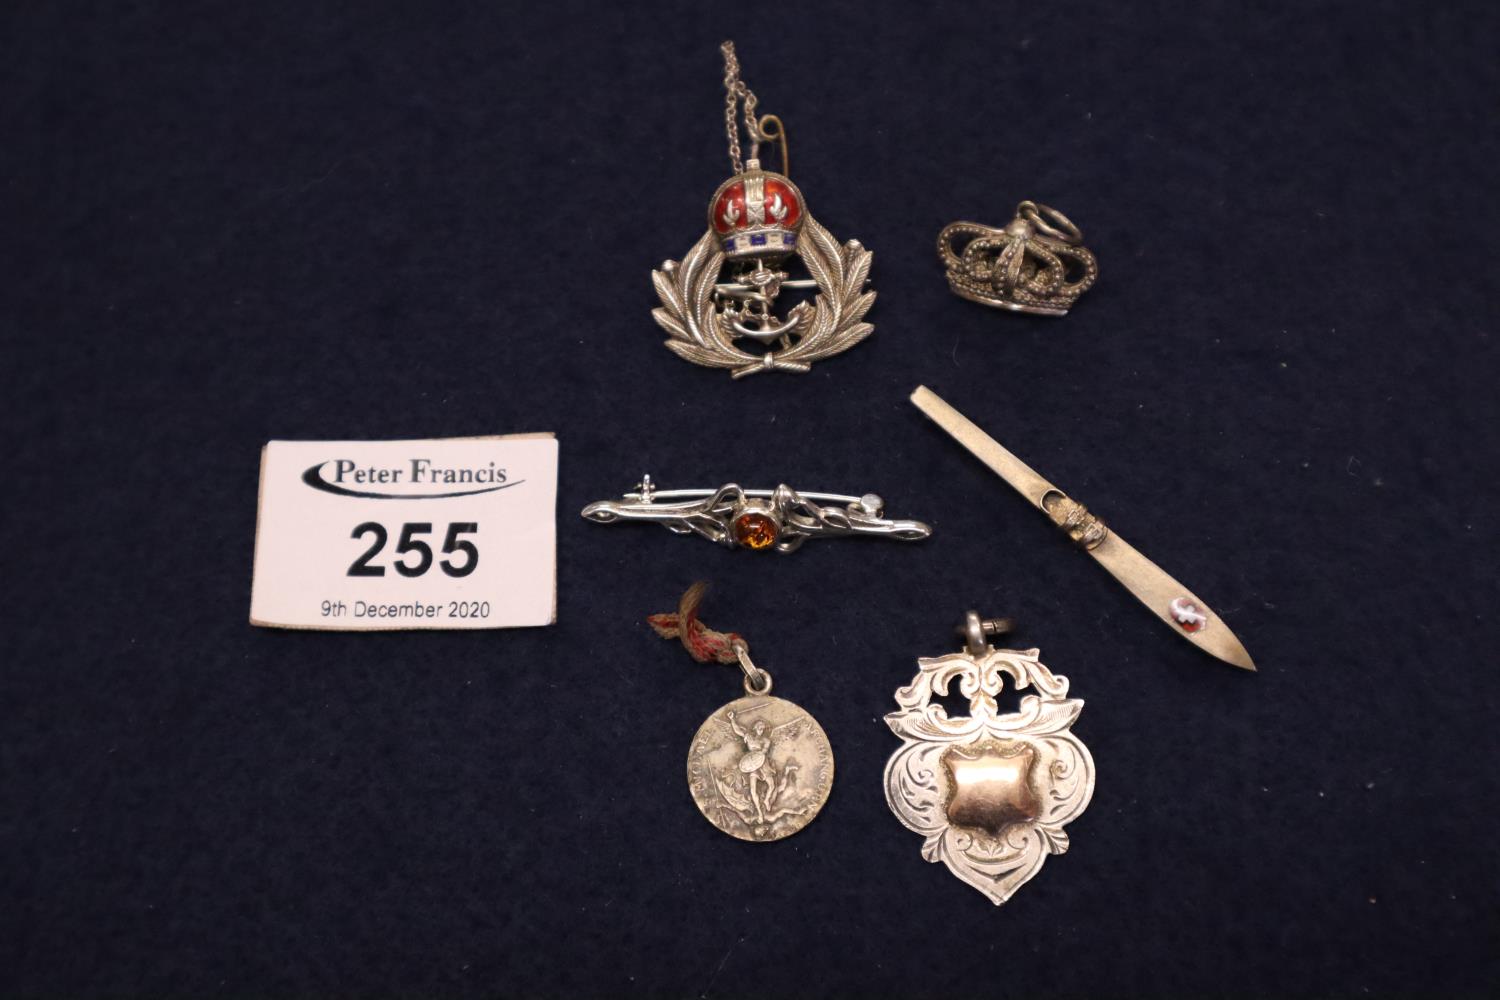 Collection of silver jewellery including a crown pendant and a brooch in the shape of a ski. (B.P.